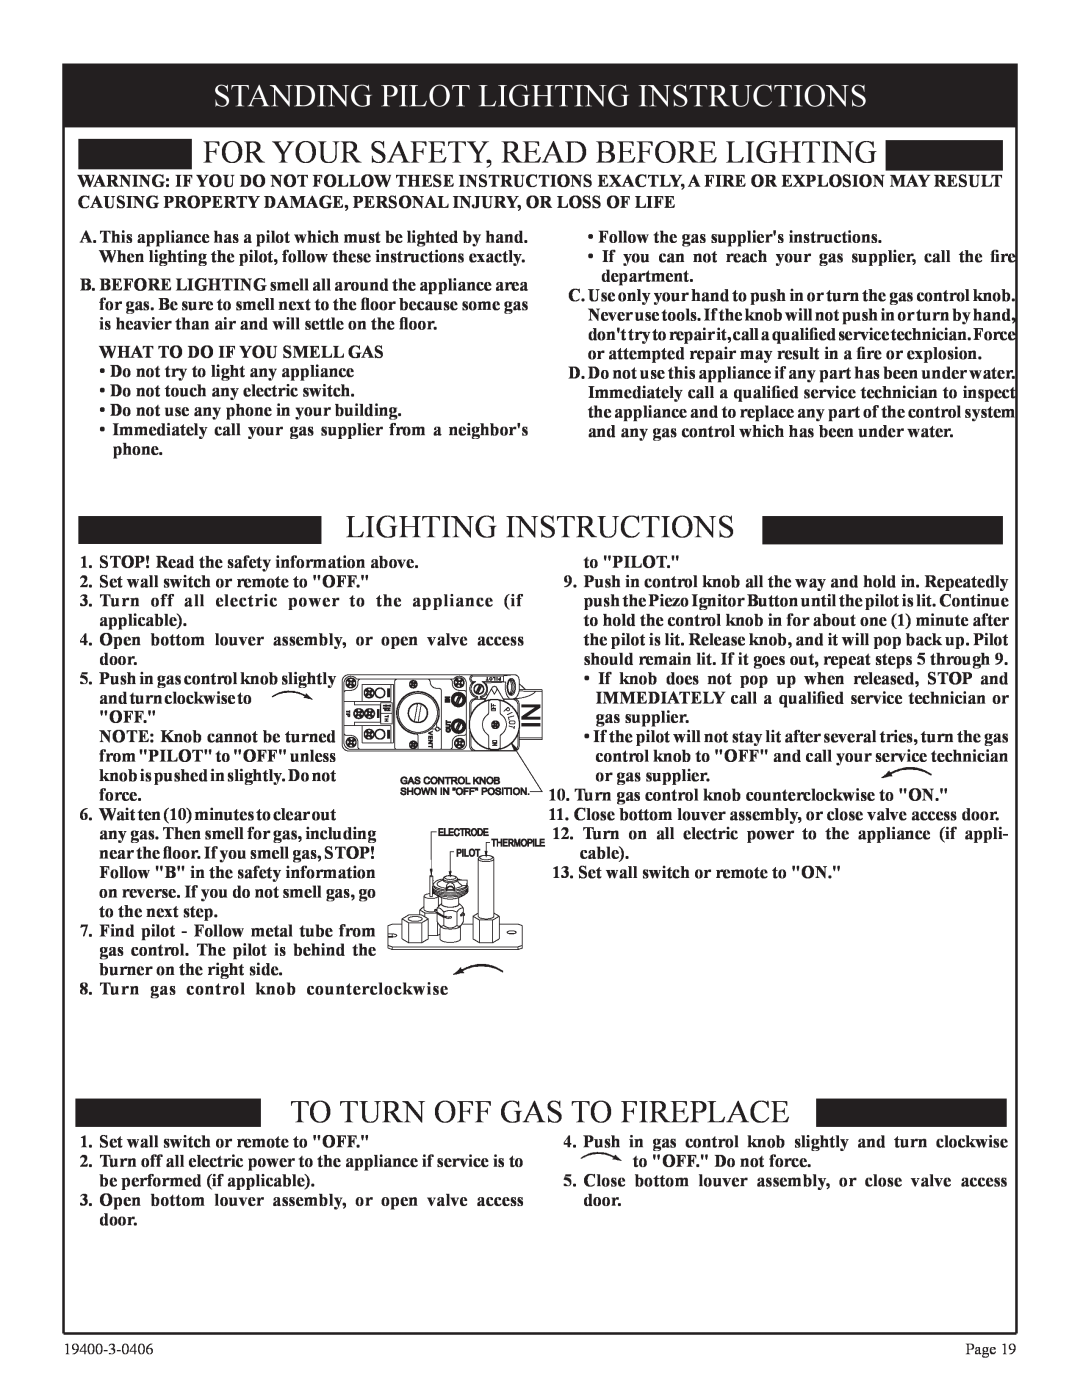 Empire Comfort Systems BVD36FP52 Standing Pilot Lighting Instructions, For Your Safety, Read Before Lighting, to PILOT 